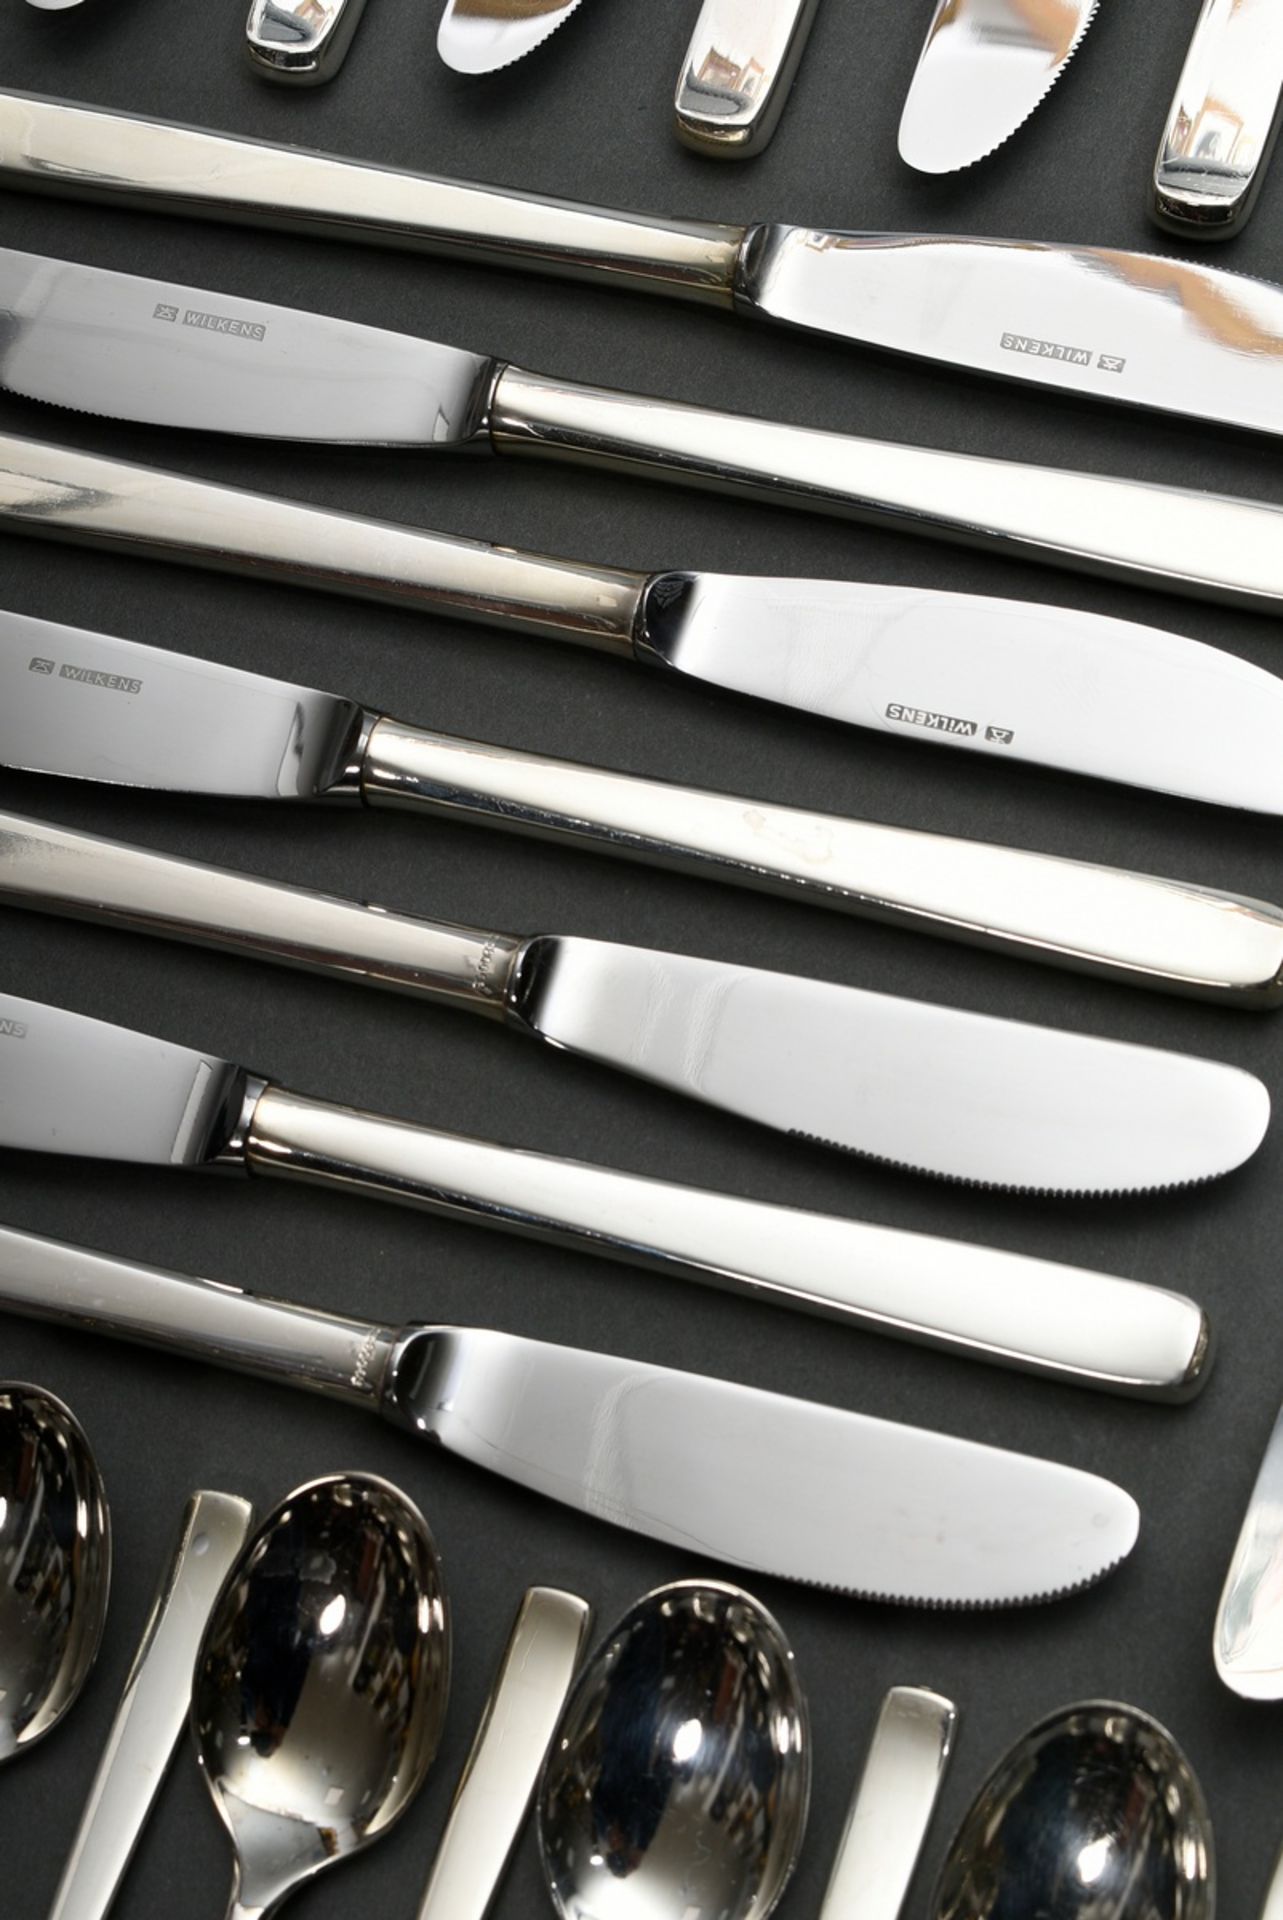 83 pieces Wilkens cutlery ‘Modern’, silver 800, 2361g (without knives), consisting of: 13 table kni - Image 5 of 7